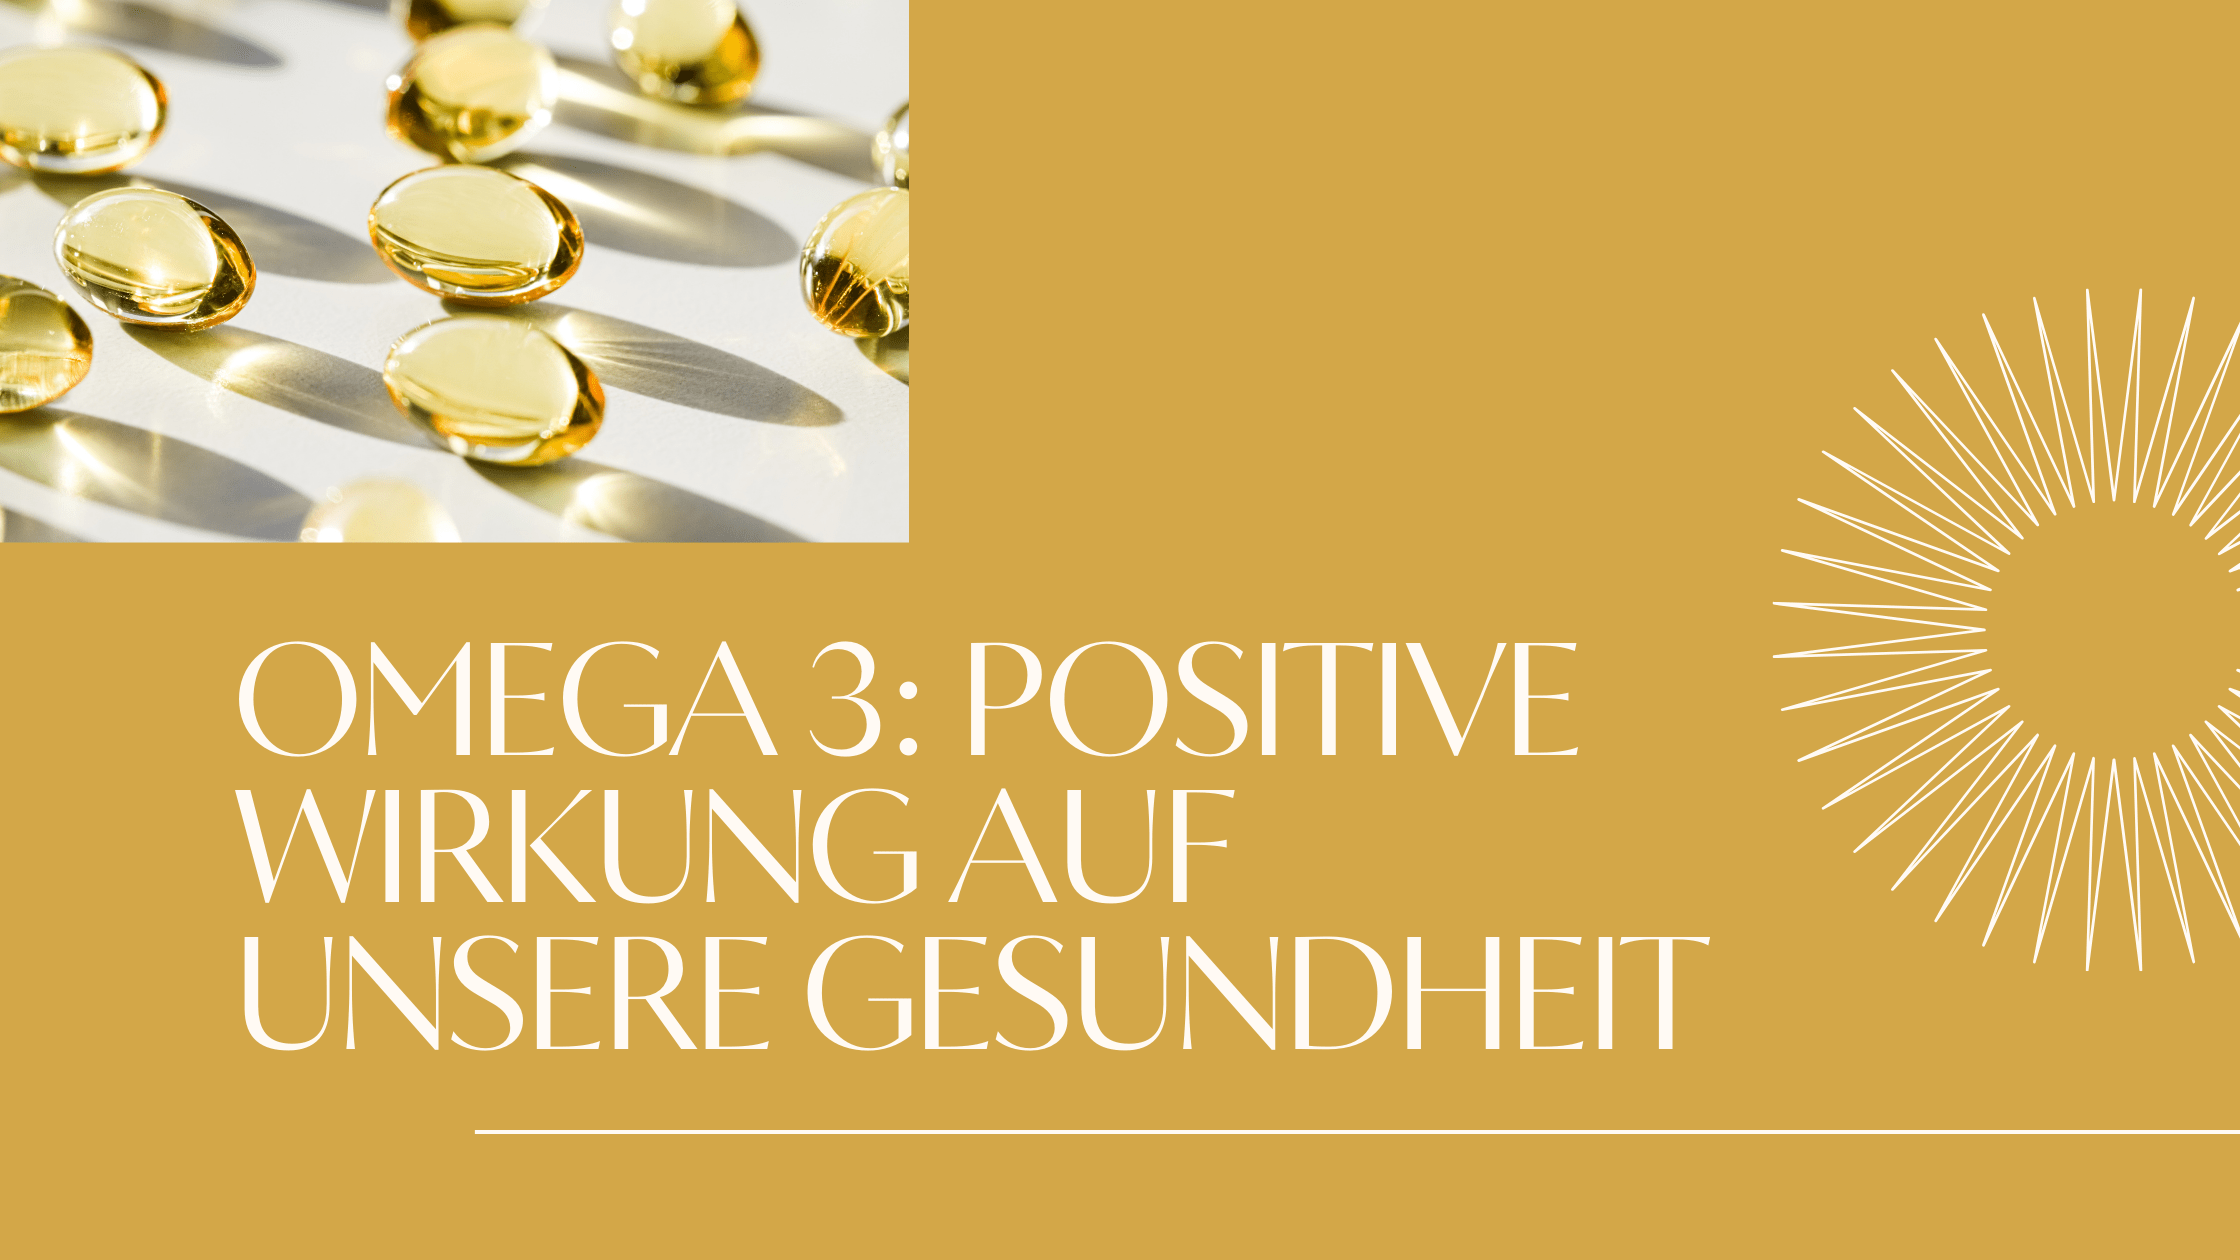 You are currently viewing Omega 3: Positive Wirkung auf unsere Gesundheit